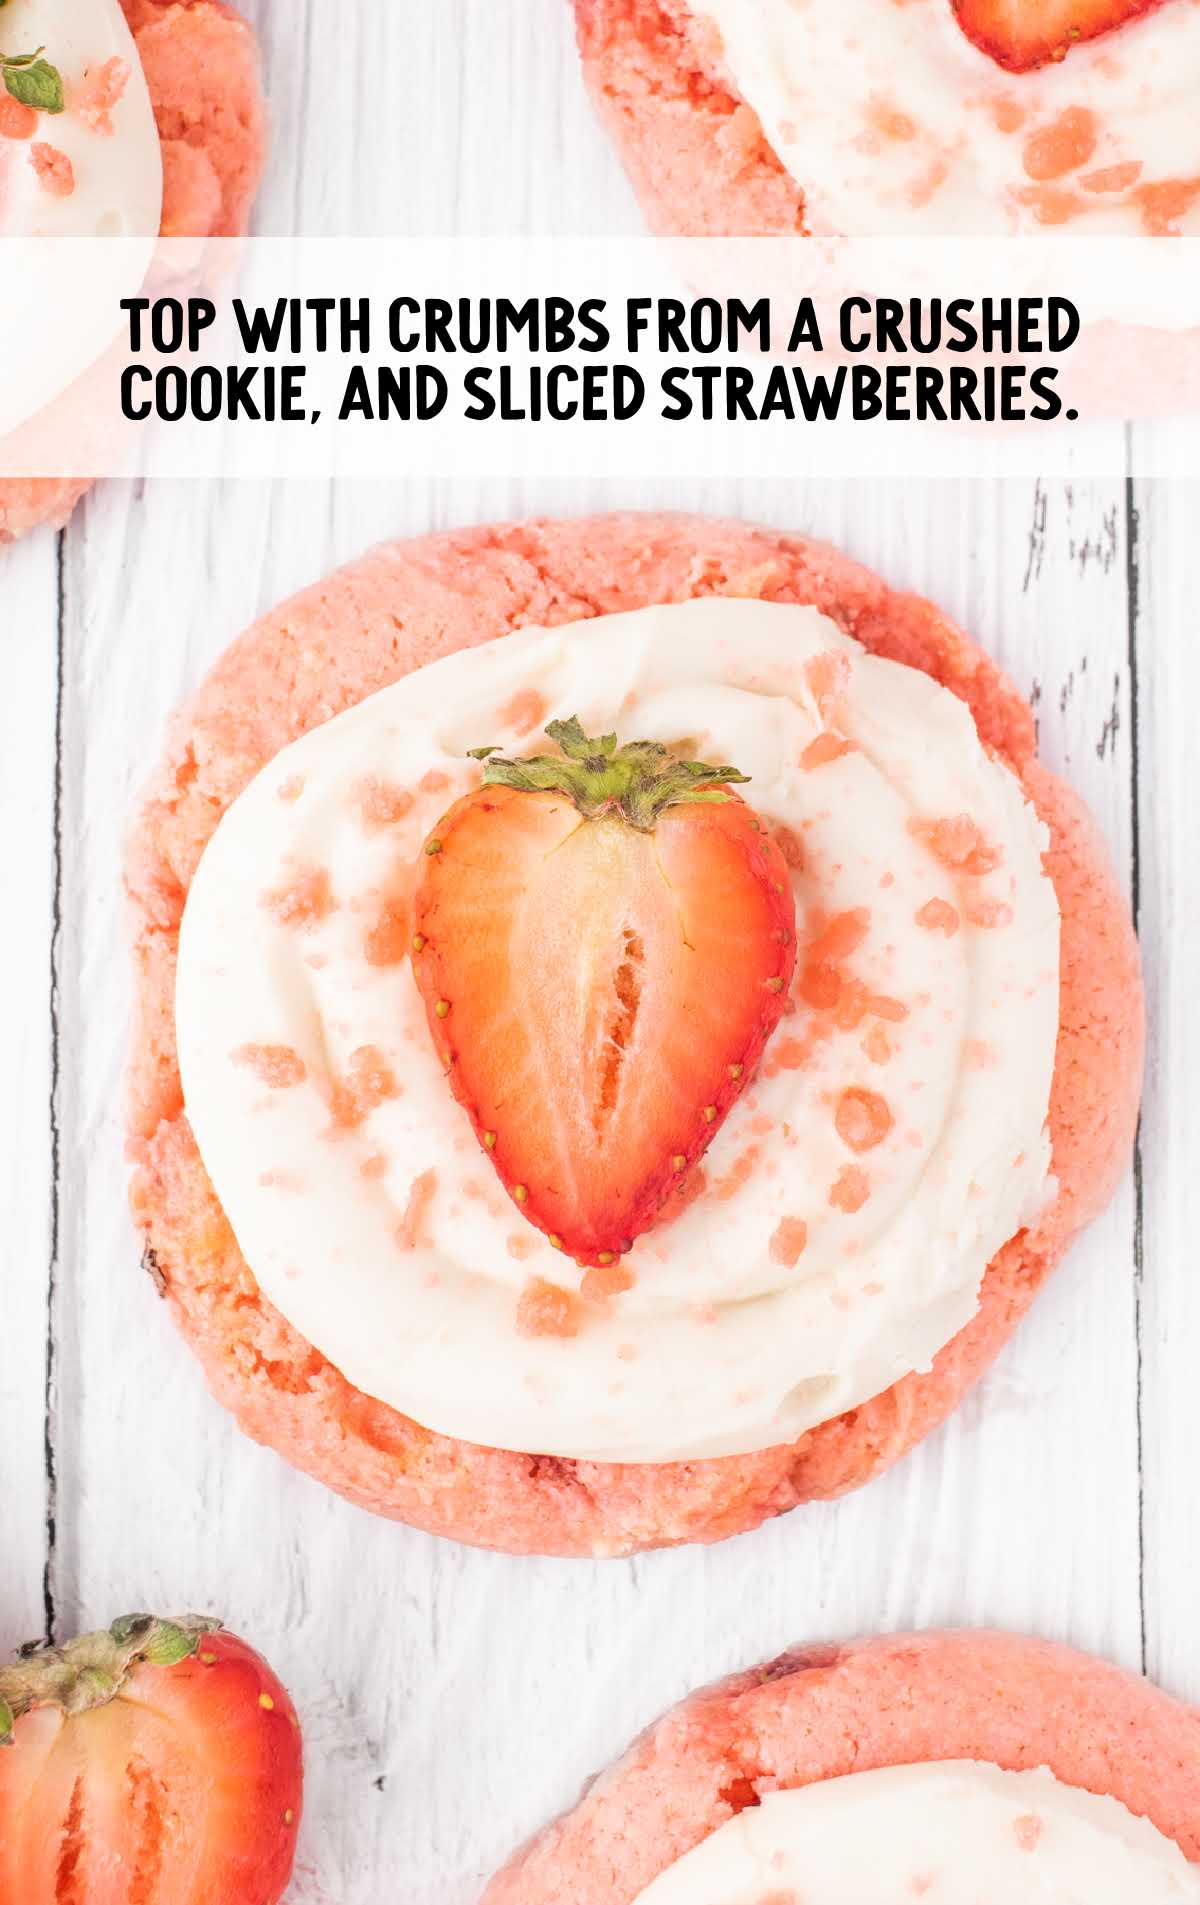 crumbs from crushed cookie topped on top with a sliced strawberry